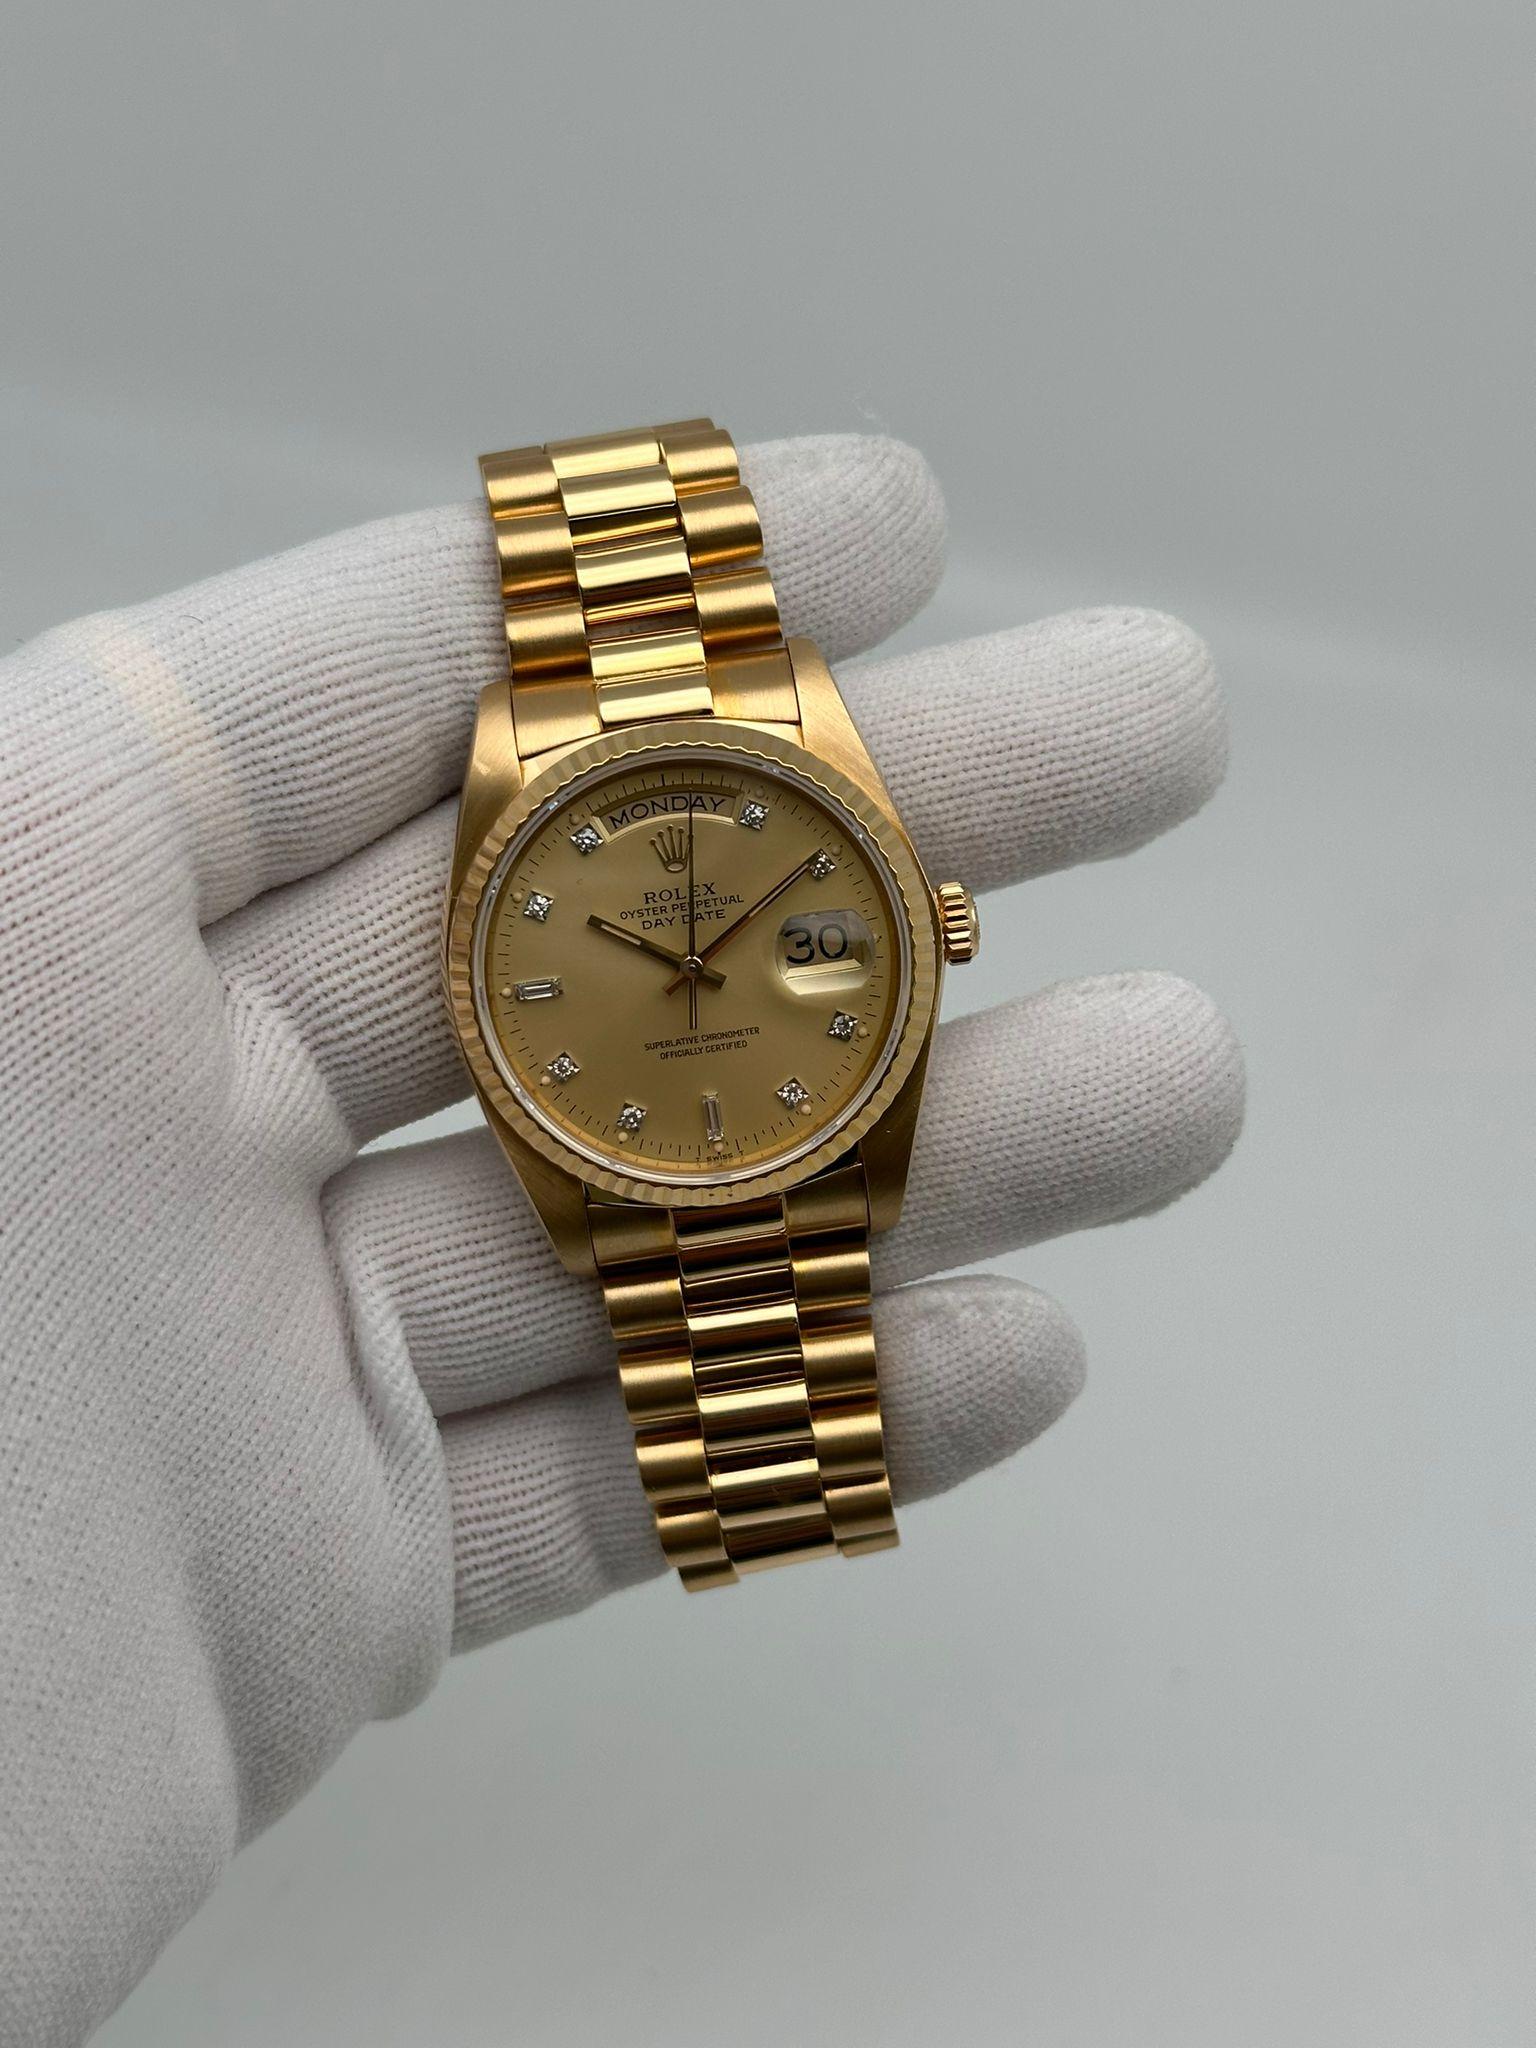 Rolex Day-Date 36mm 18k Yellow Gold Champagne Diamond Dial Automatic Watch 18038 For Sale 5